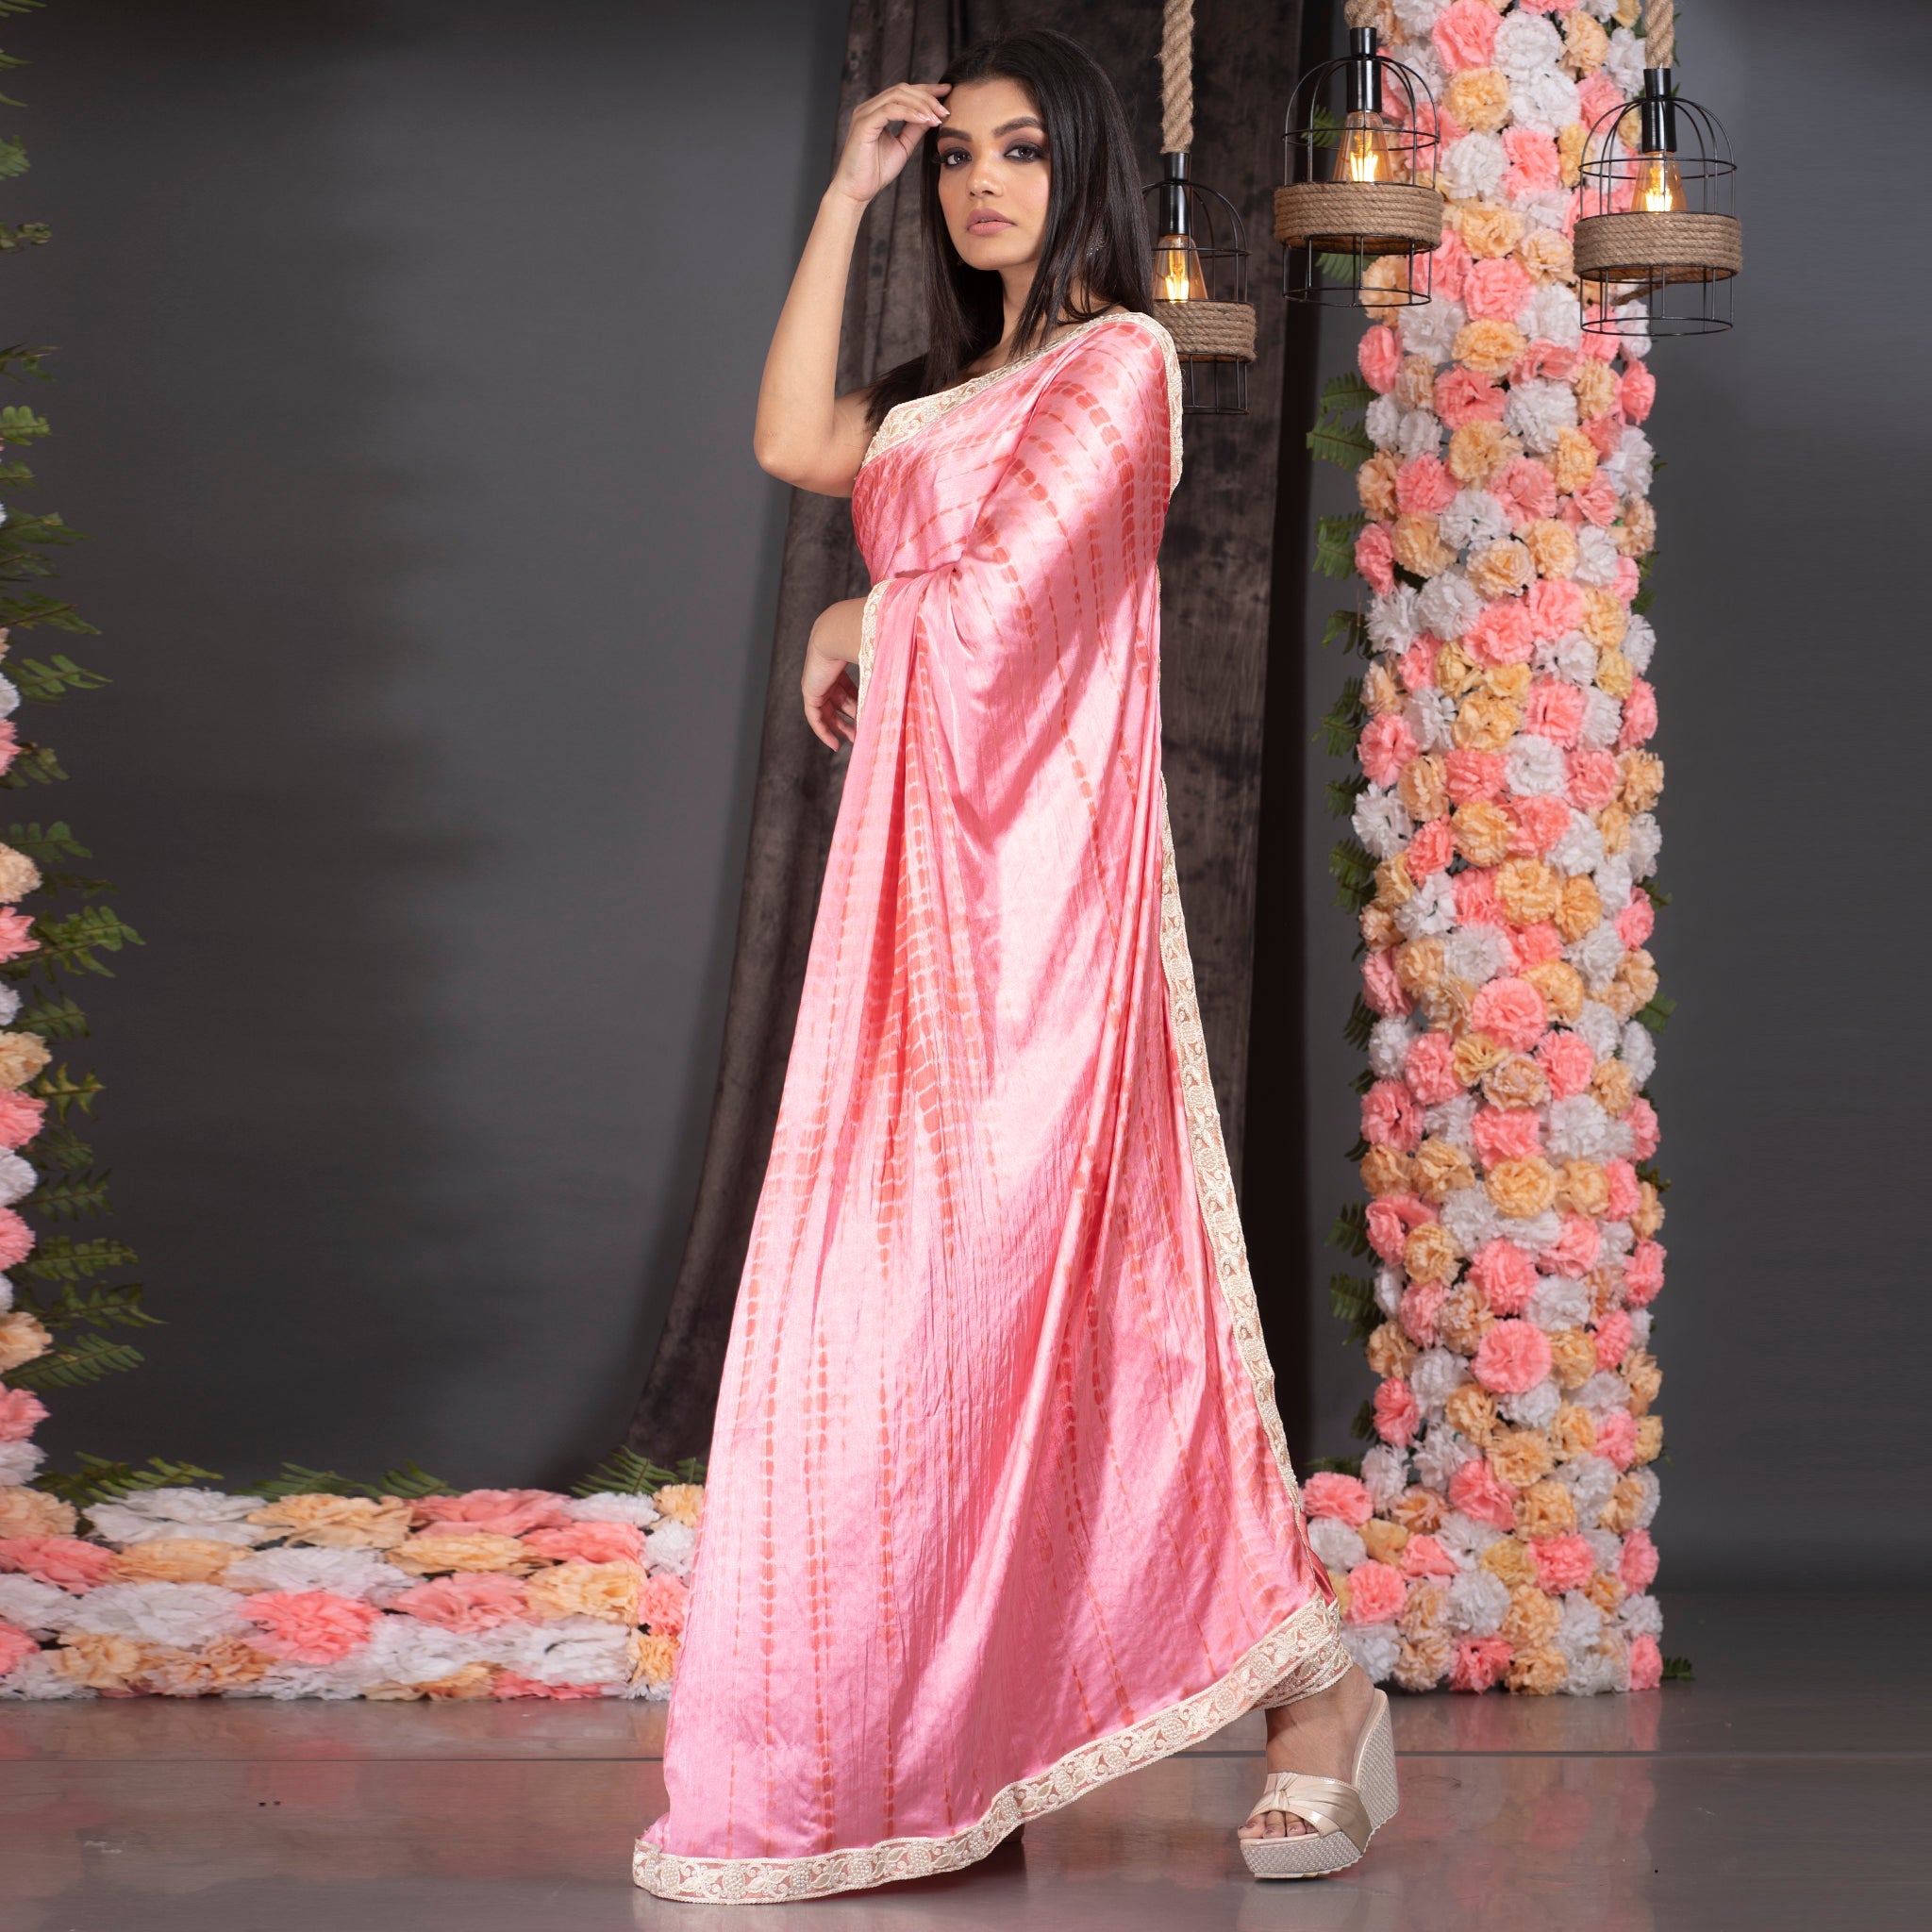 Women's Pink With Red Shibori Satin Saree With Pearl Embroidered Lace Border - Boveee